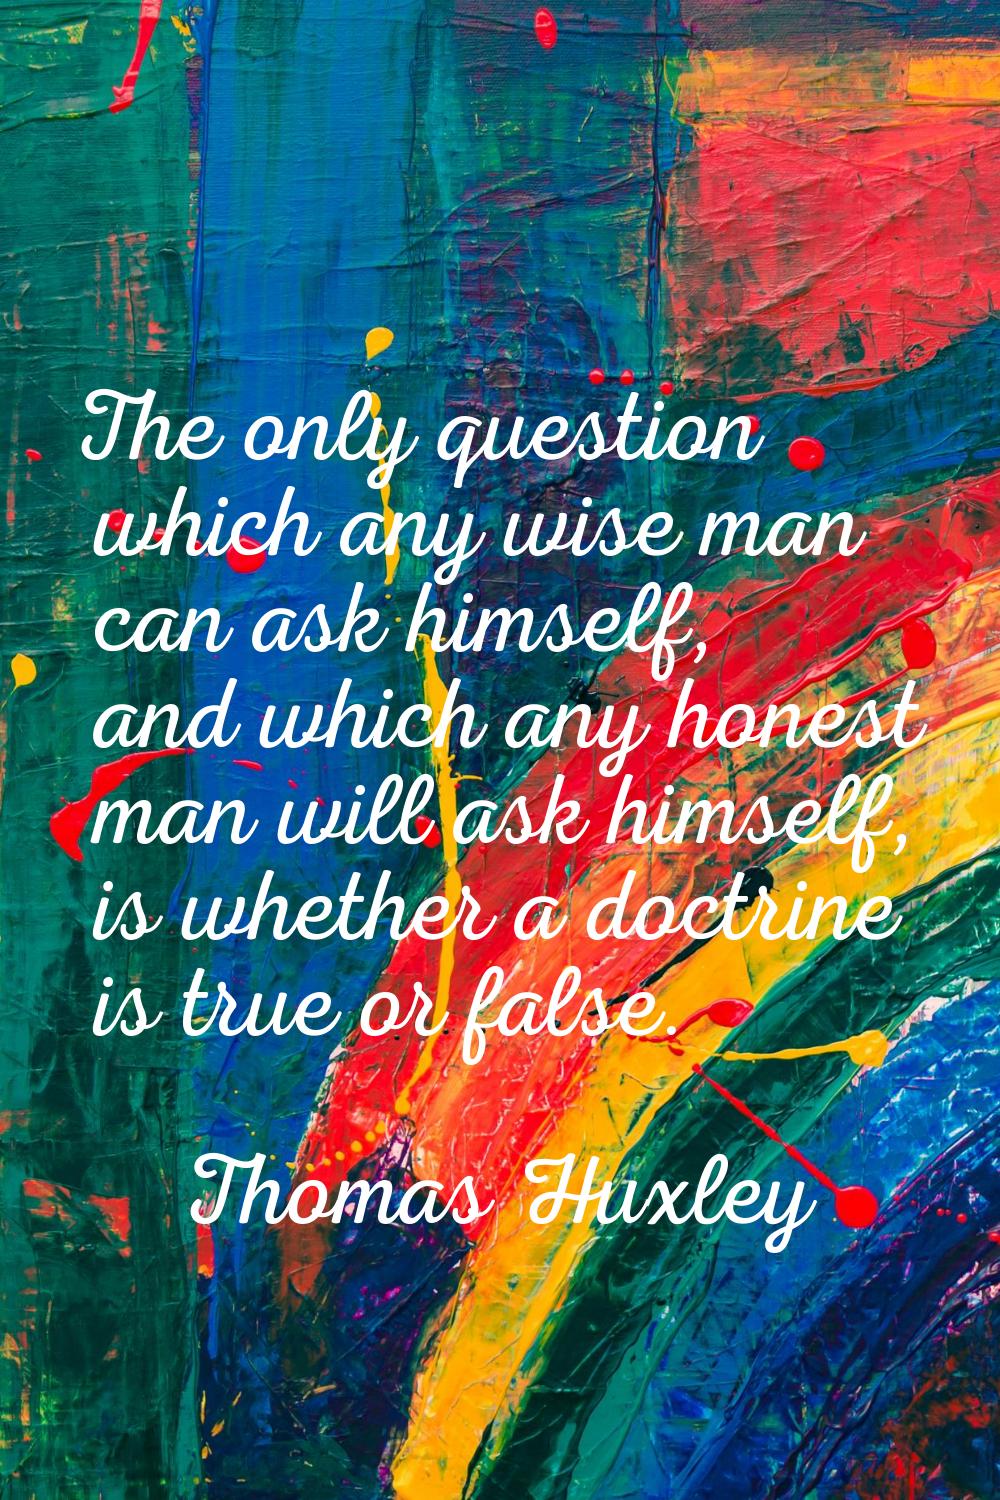 The only question which any wise man can ask himself, and which any honest man will ask himself, is